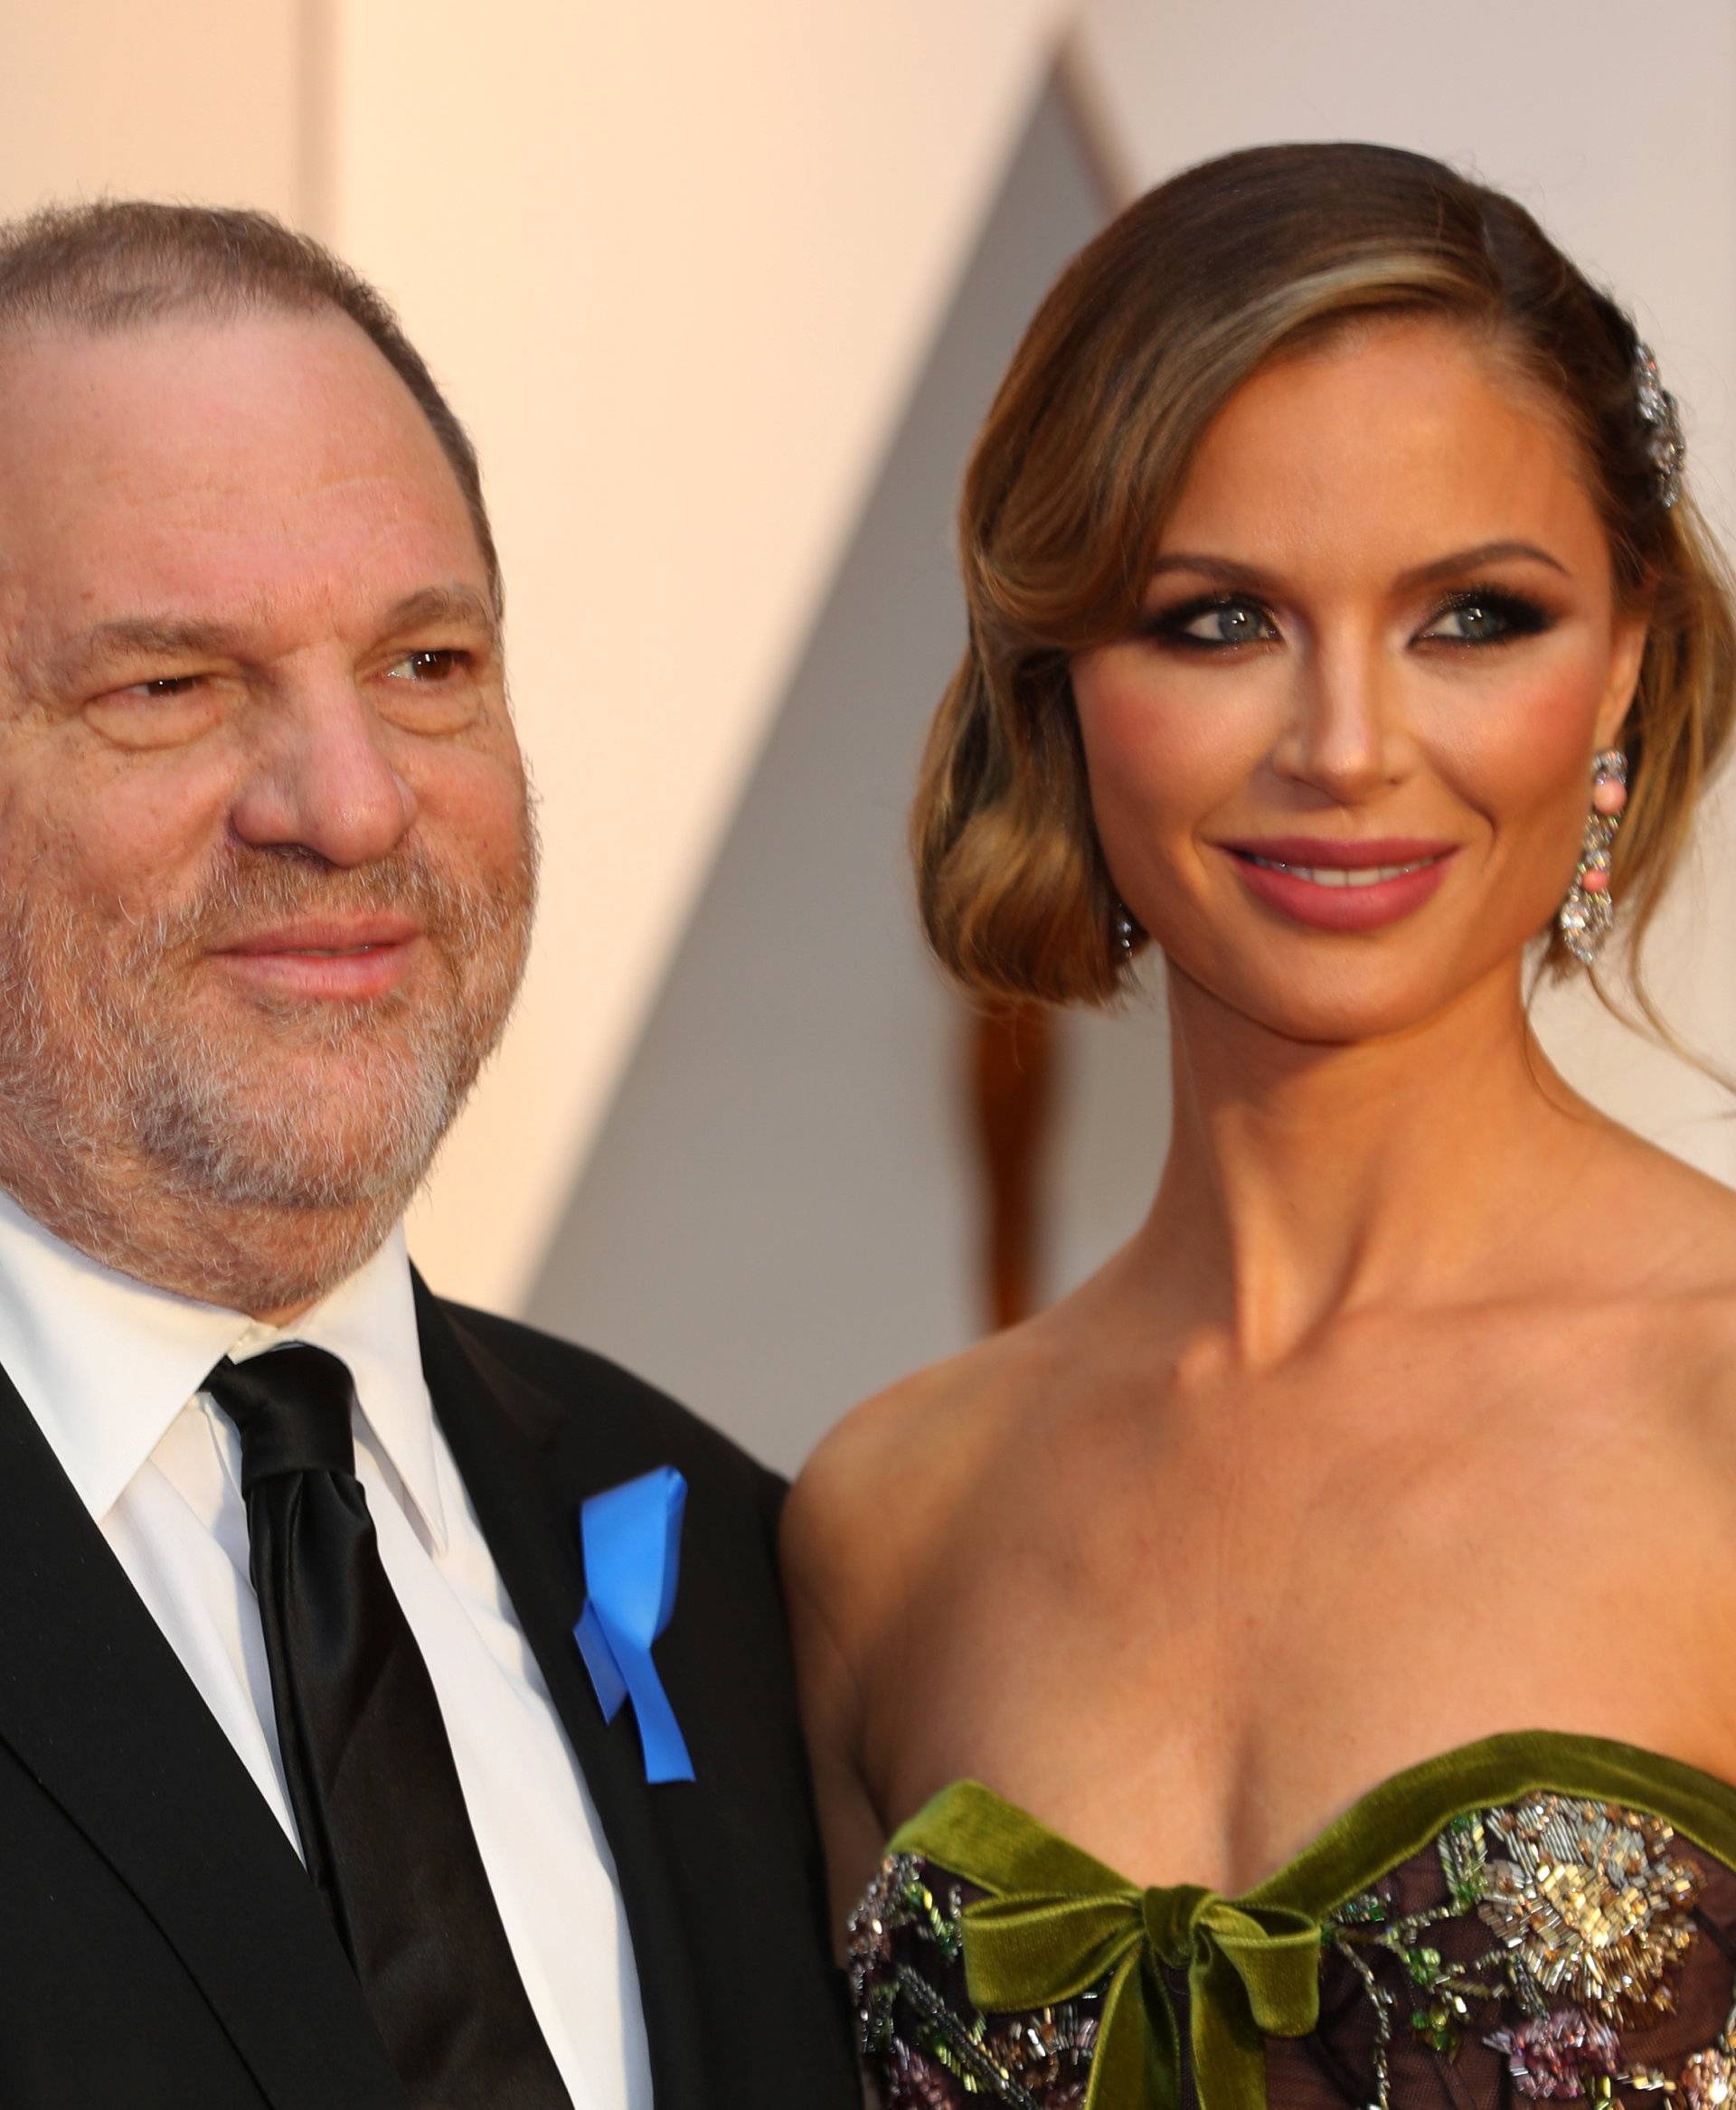 Harvey Weinstein and wife Georgina Chapman arrive at the 89th Academy Awards in Hollywood